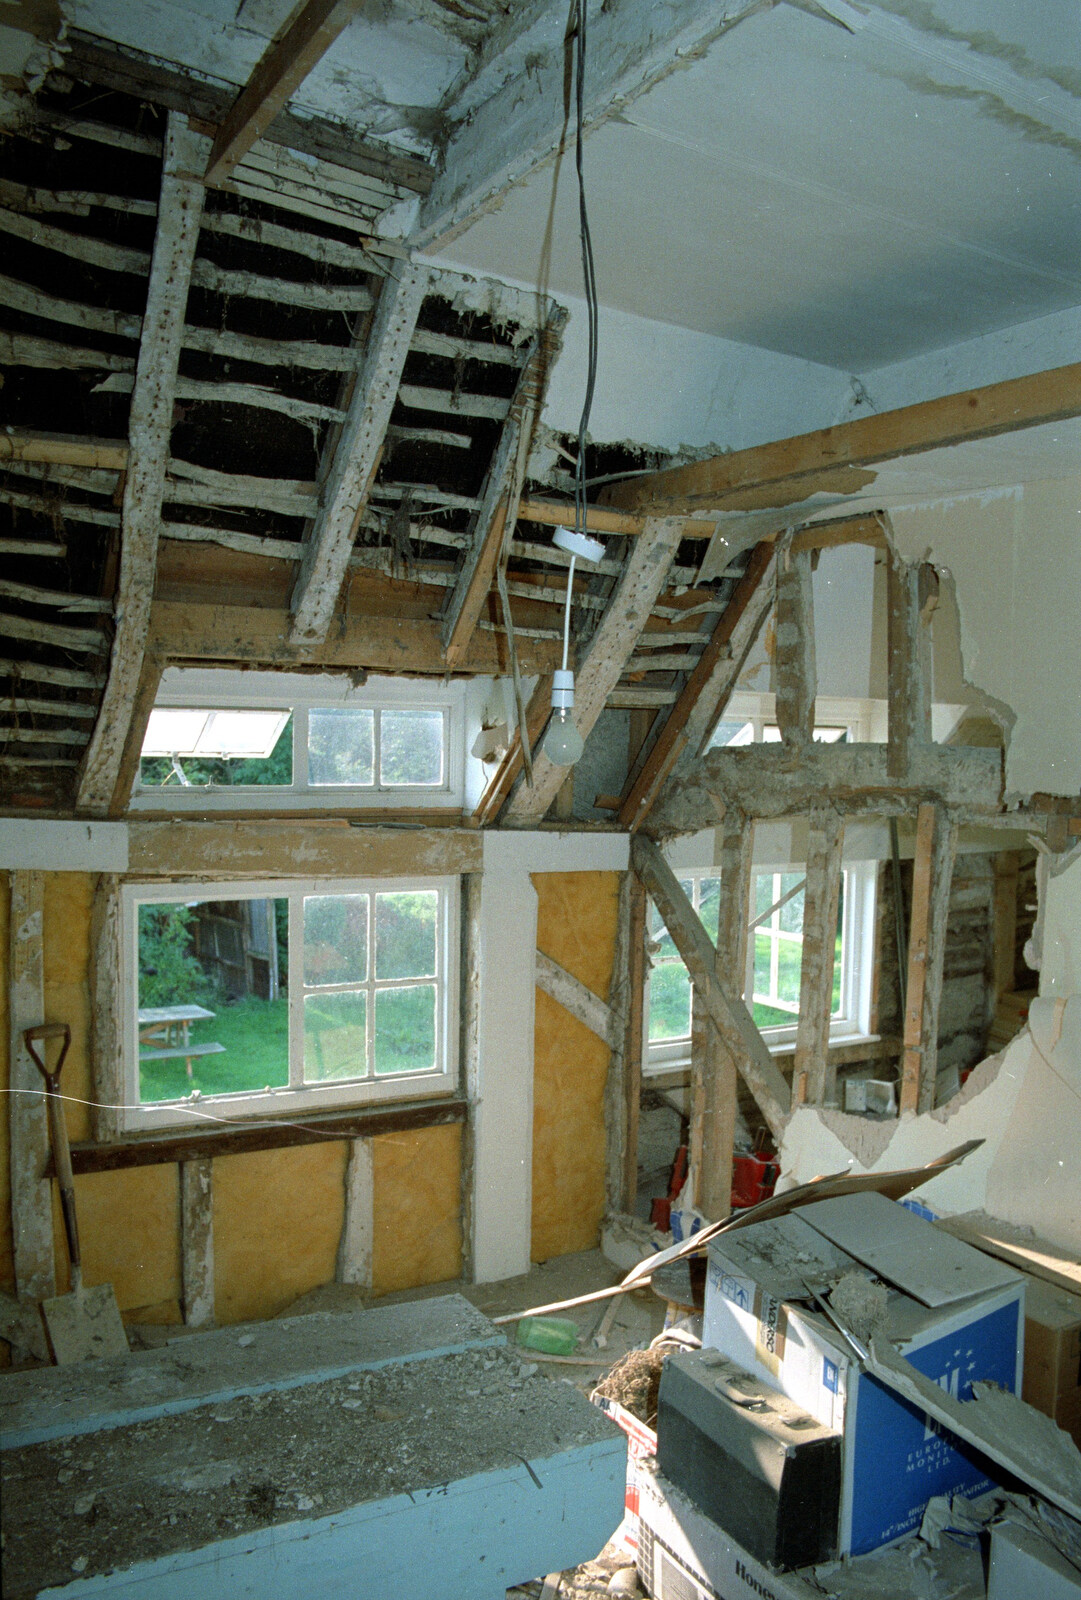 The remaining pine timber across marks the height of ceiling 3. The two extra ceilings above can be seen. from Bedroom Demolition, Brome, Suffolk - 10th October 1994